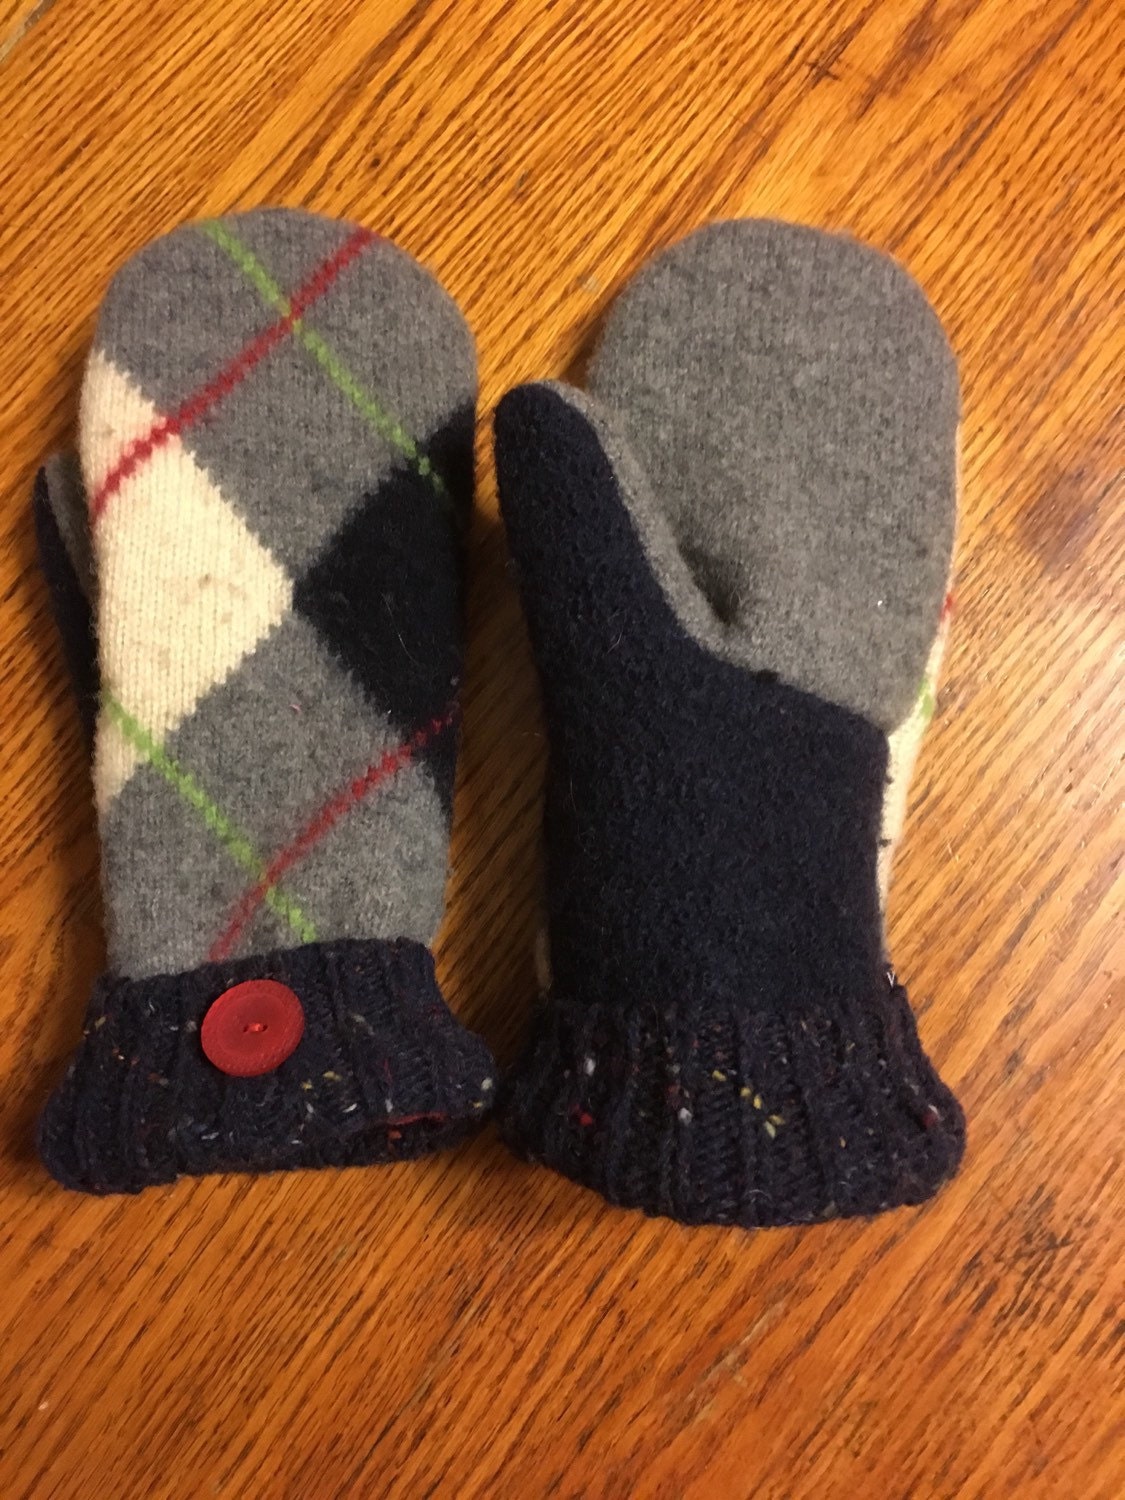 Soft and warm handmade wool sweater mittens by RoundRobinRestyle